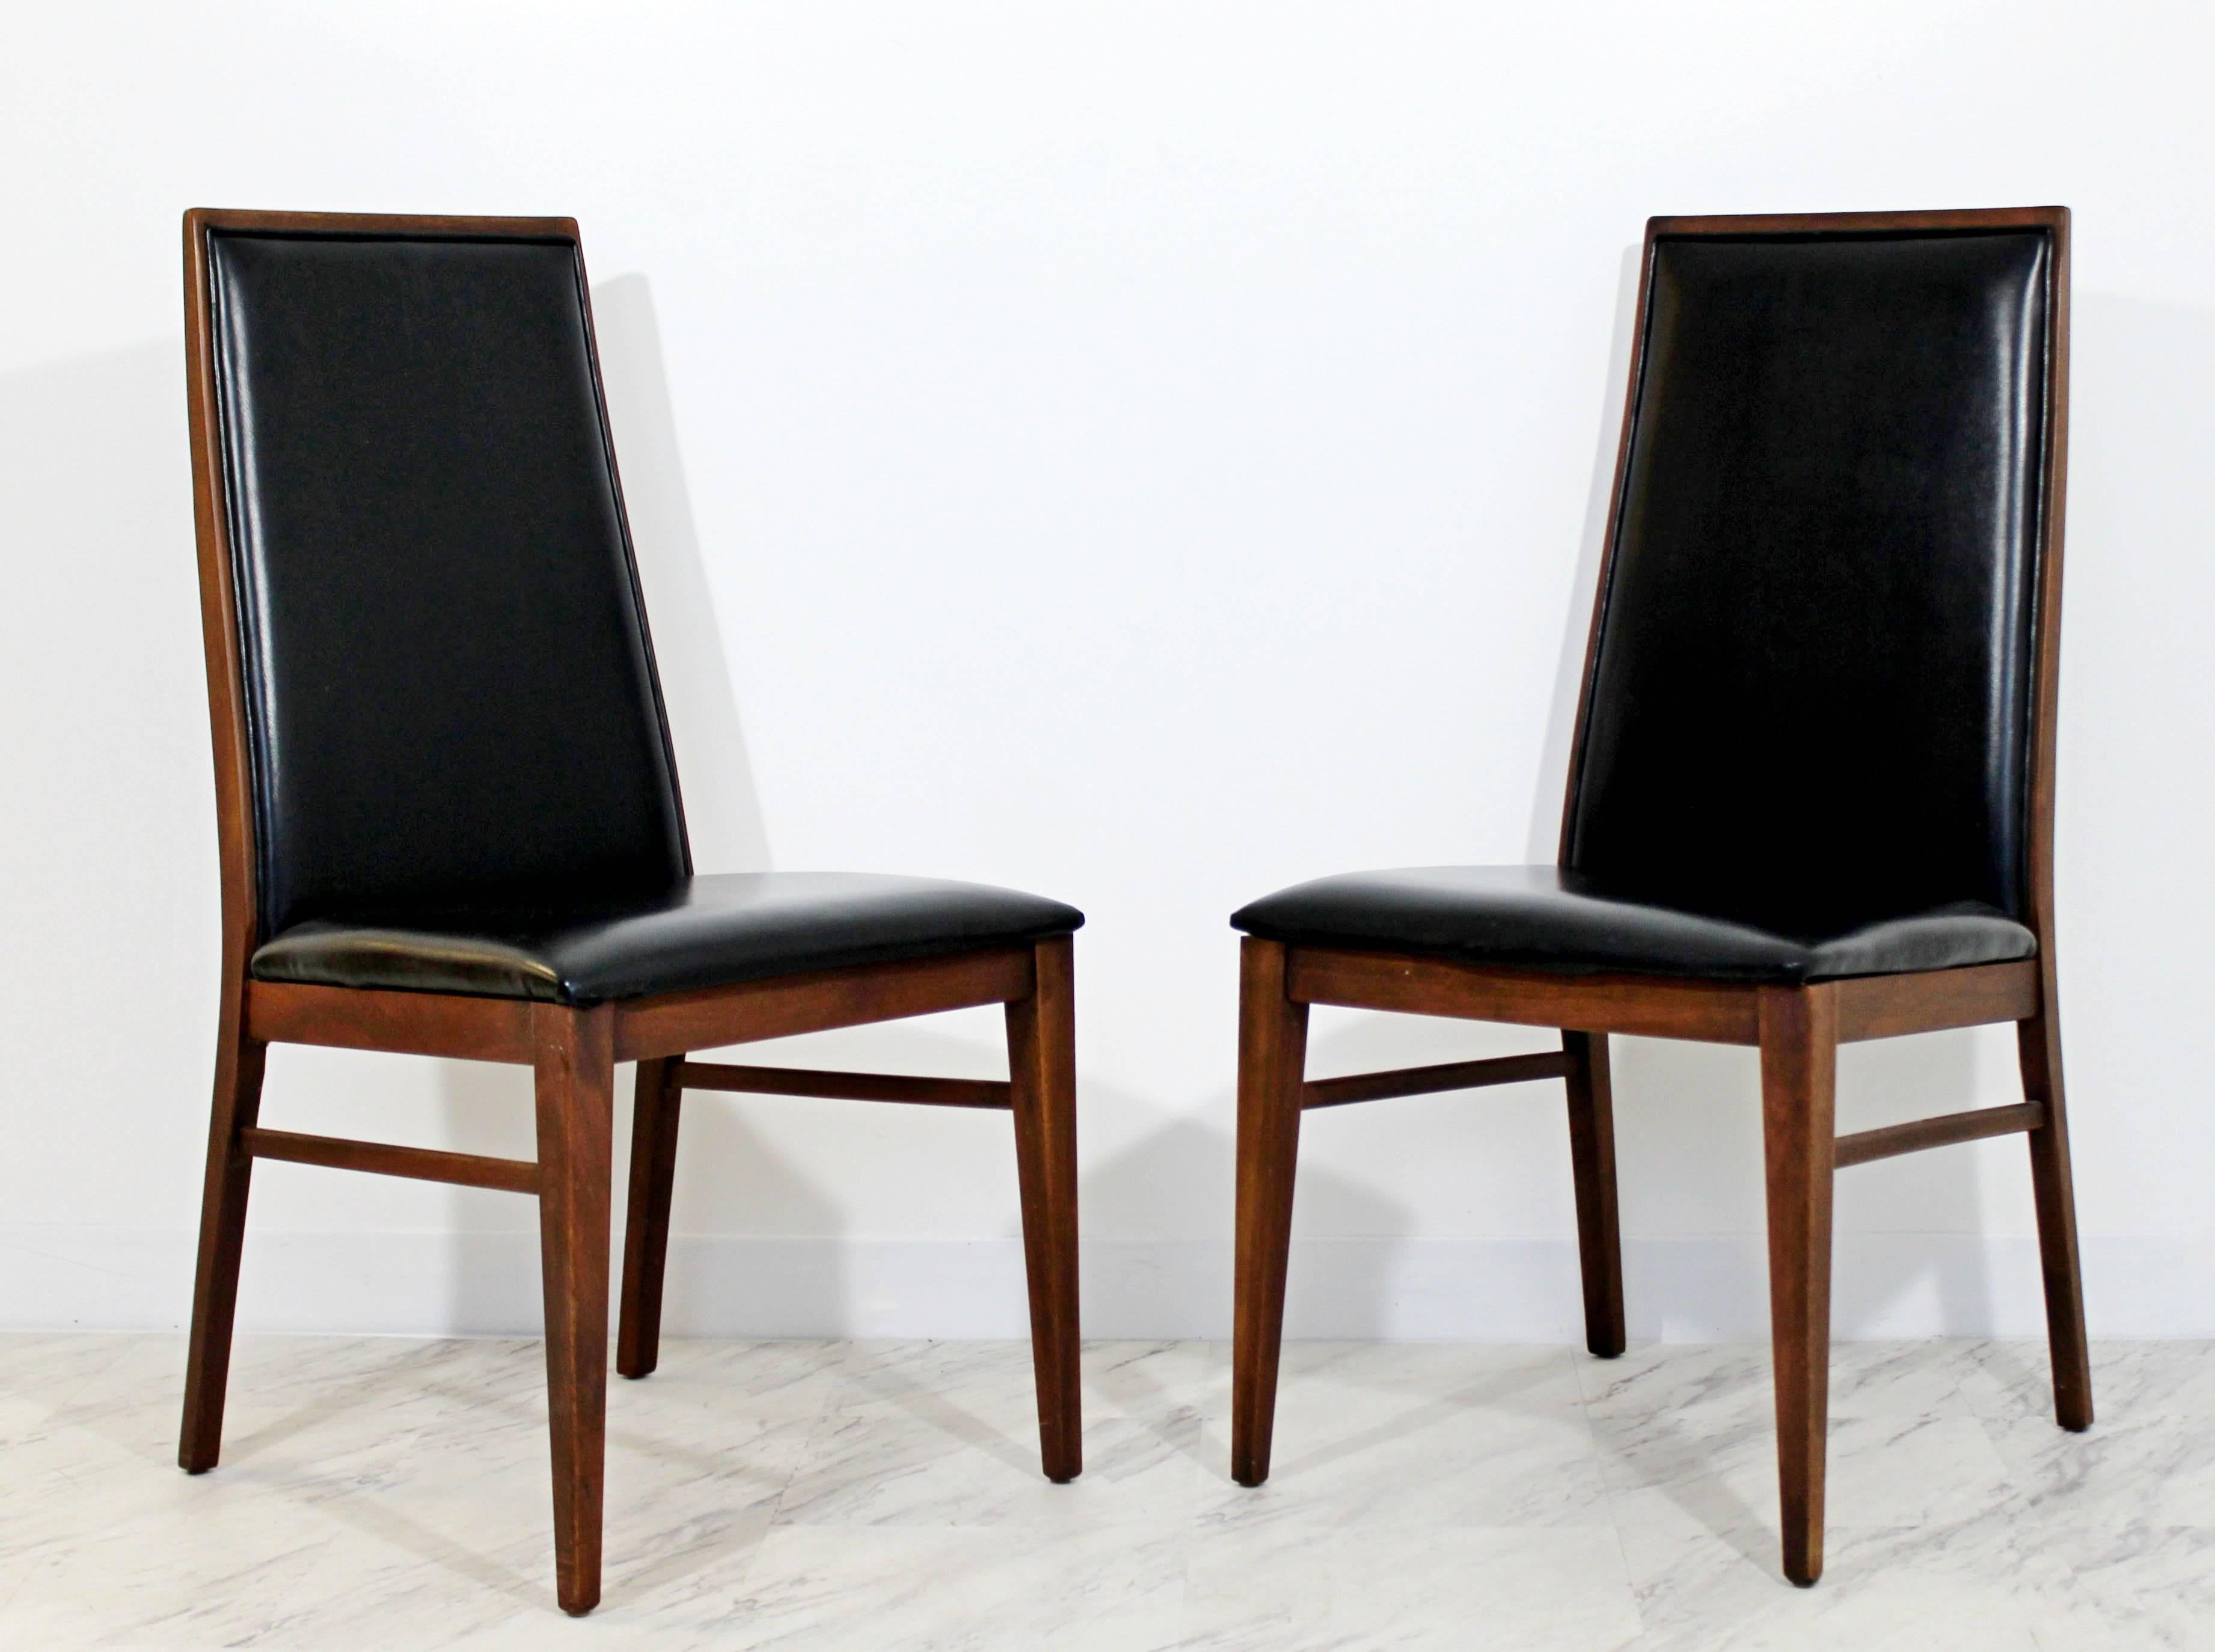 Mid-20th Century Mid-Century Modern Milo Baughman Directional Dining Table Dillinghman Six Chairs